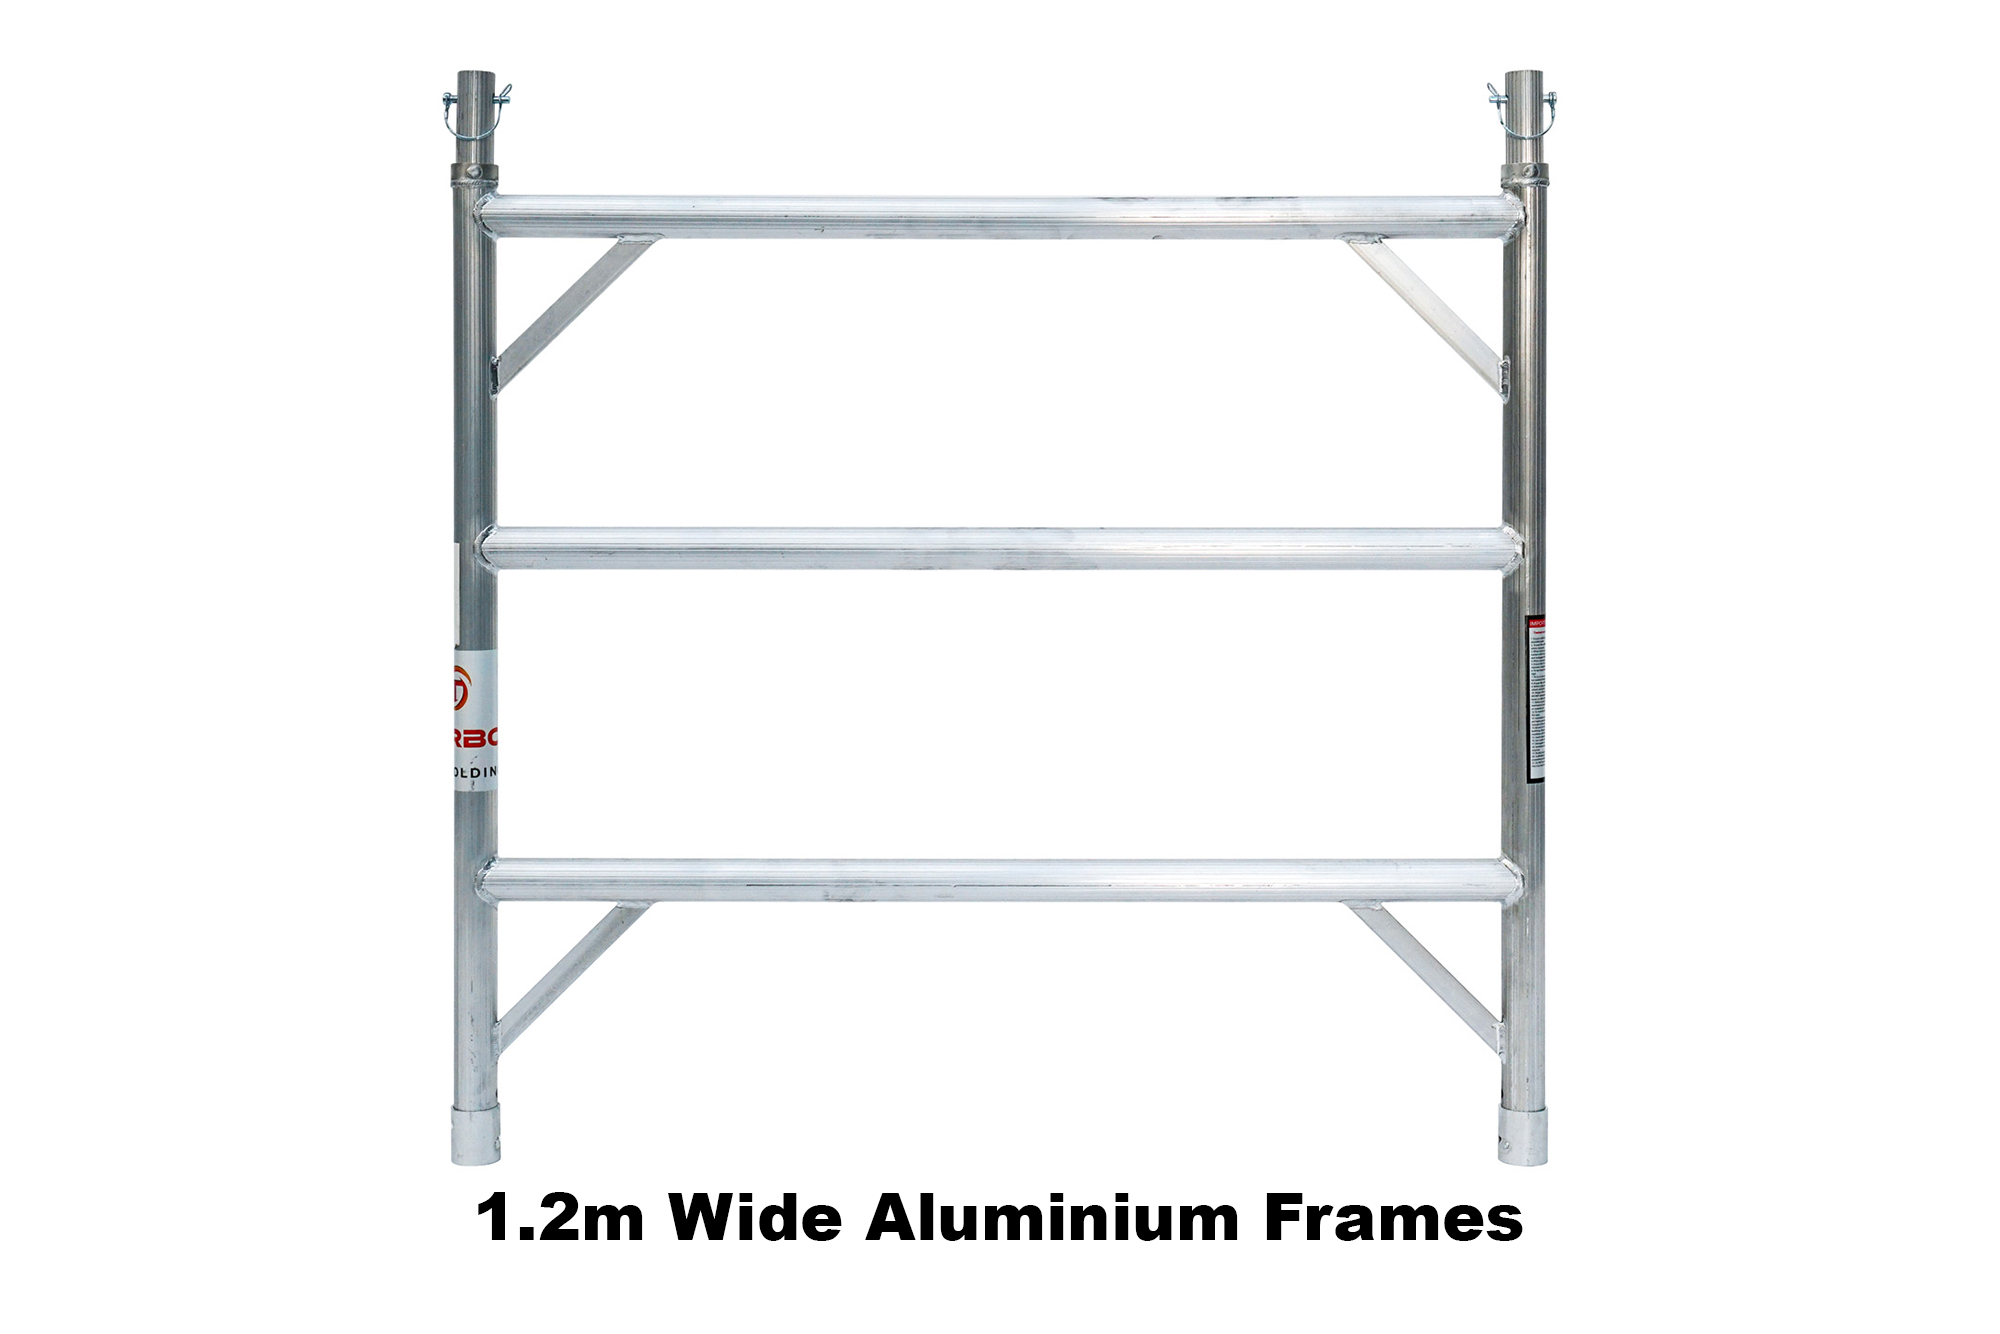 5.5m – 5.8m Wide Aluminium Mobile Scaffold Tower (Standing Height)